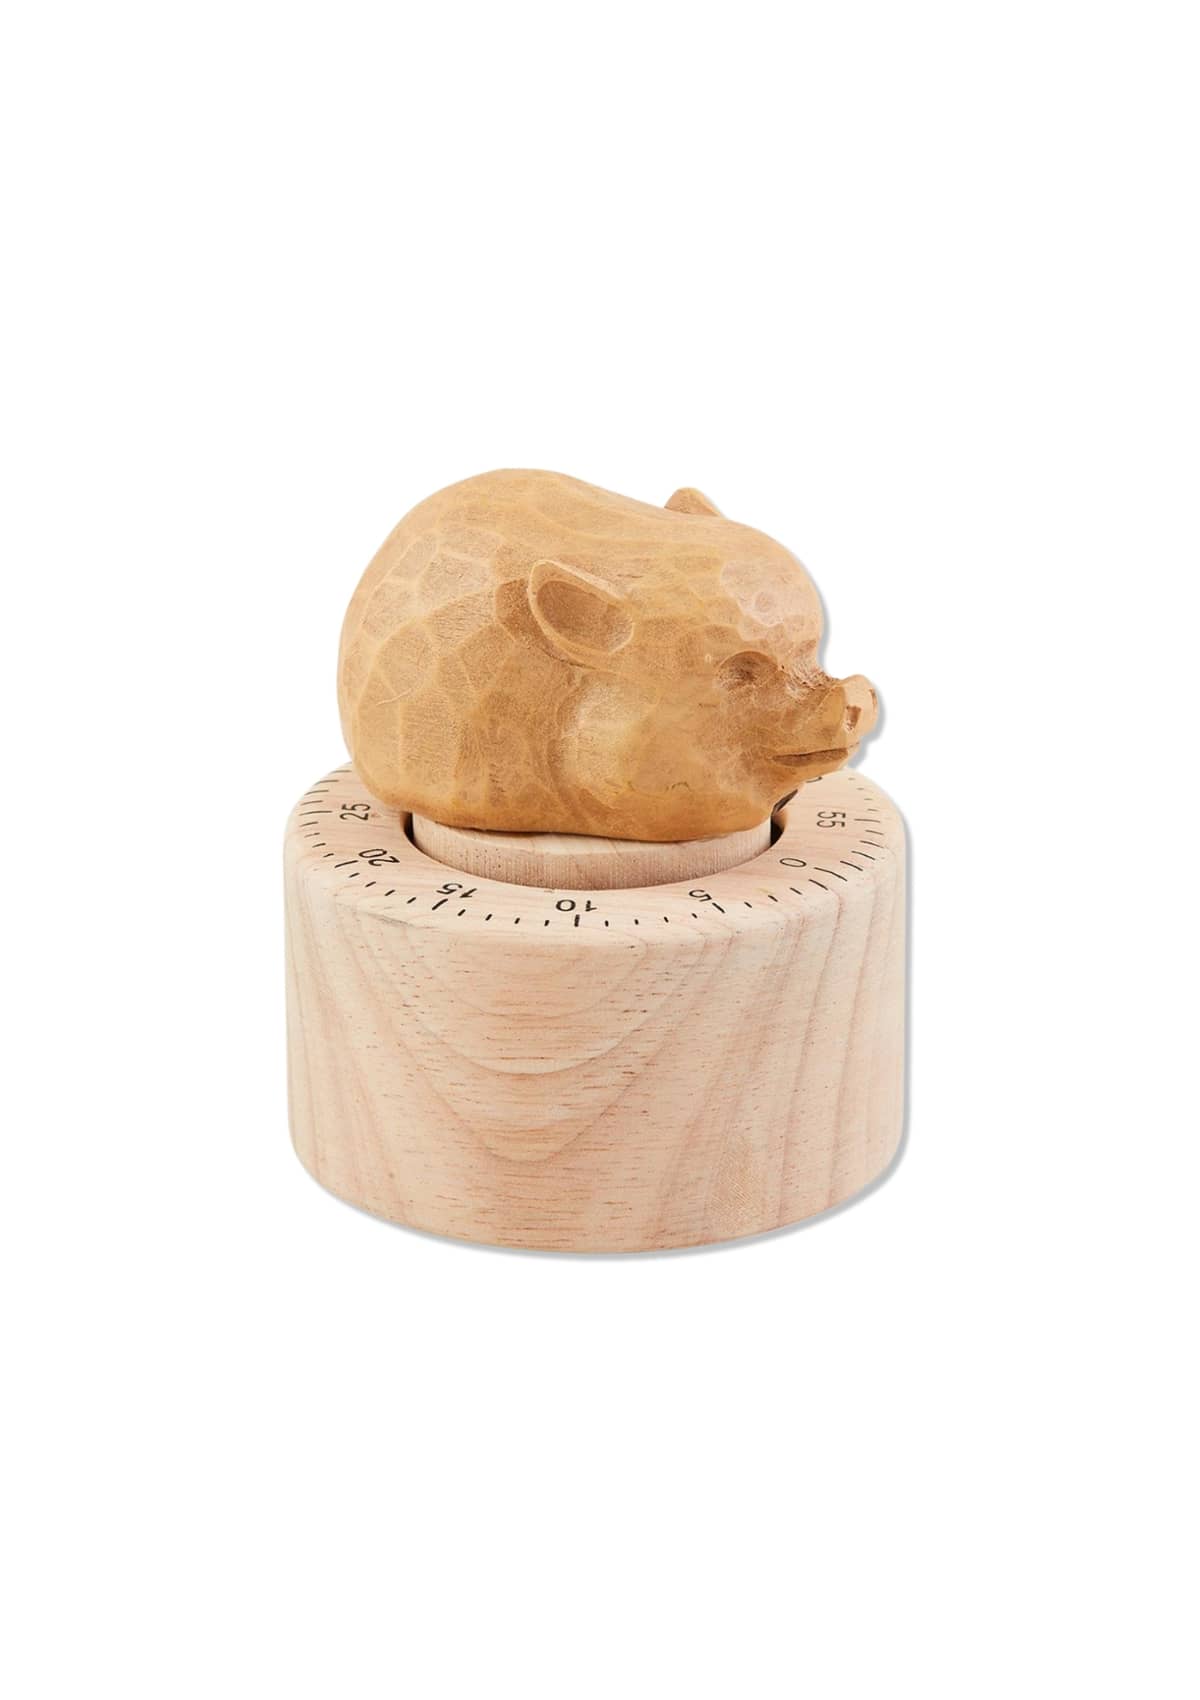 Wood timer with wood pig on top.